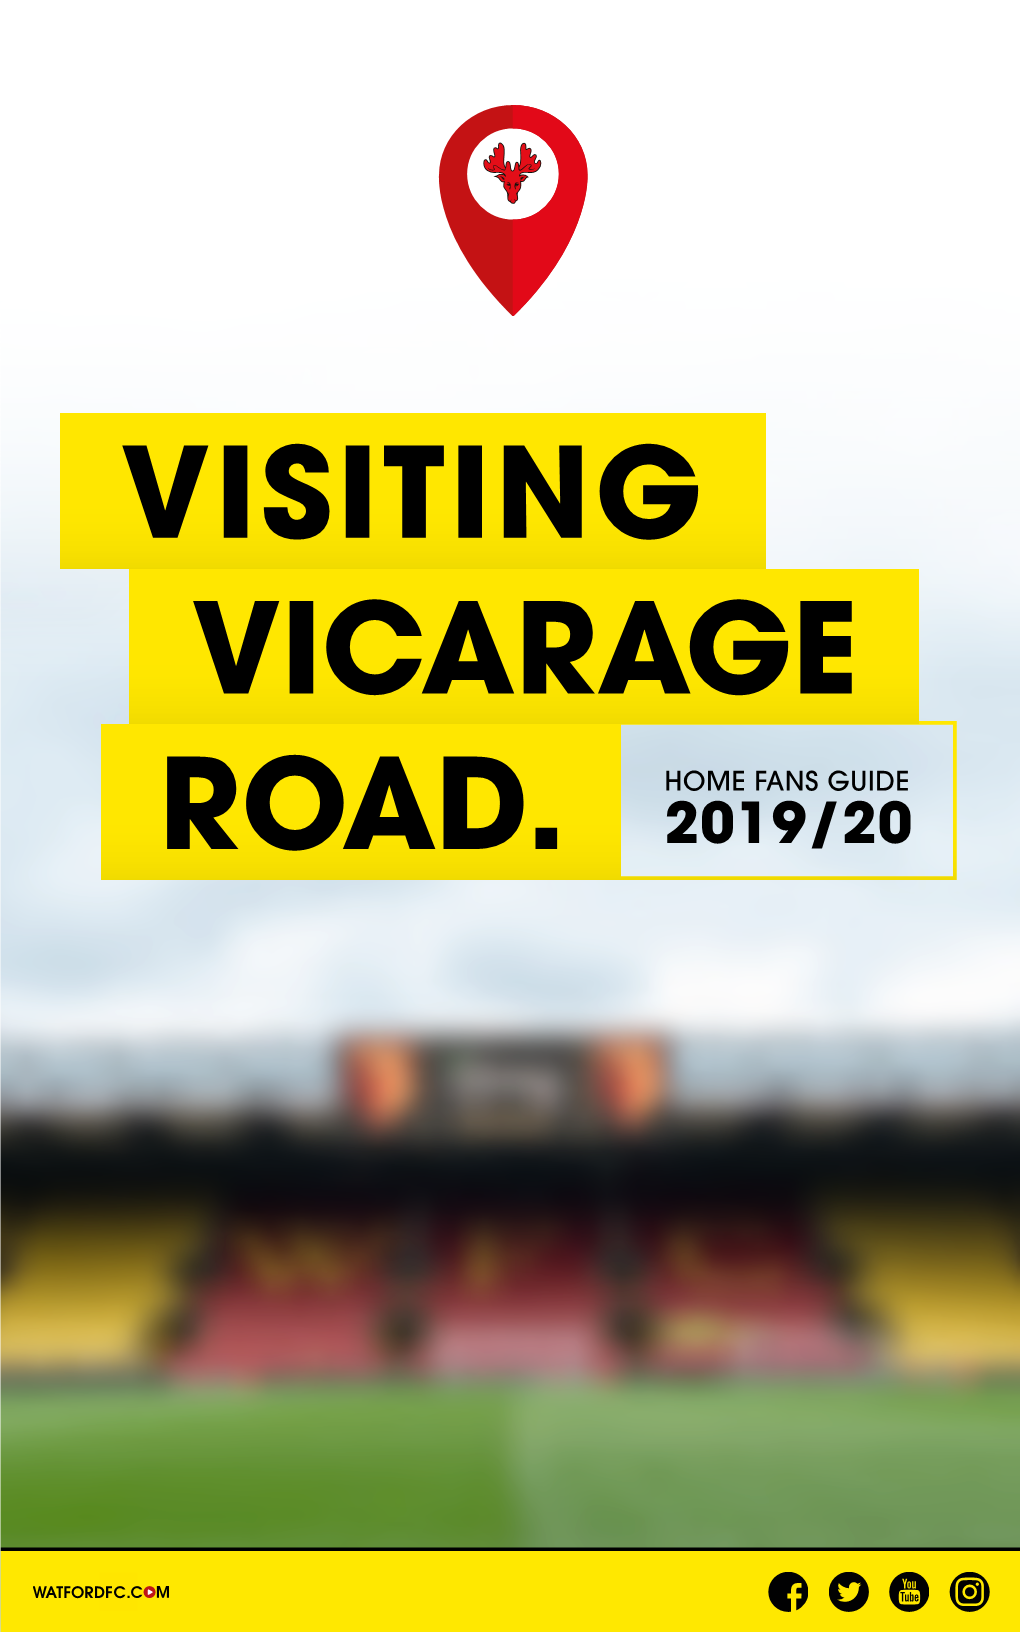 Home Fans Guide Road